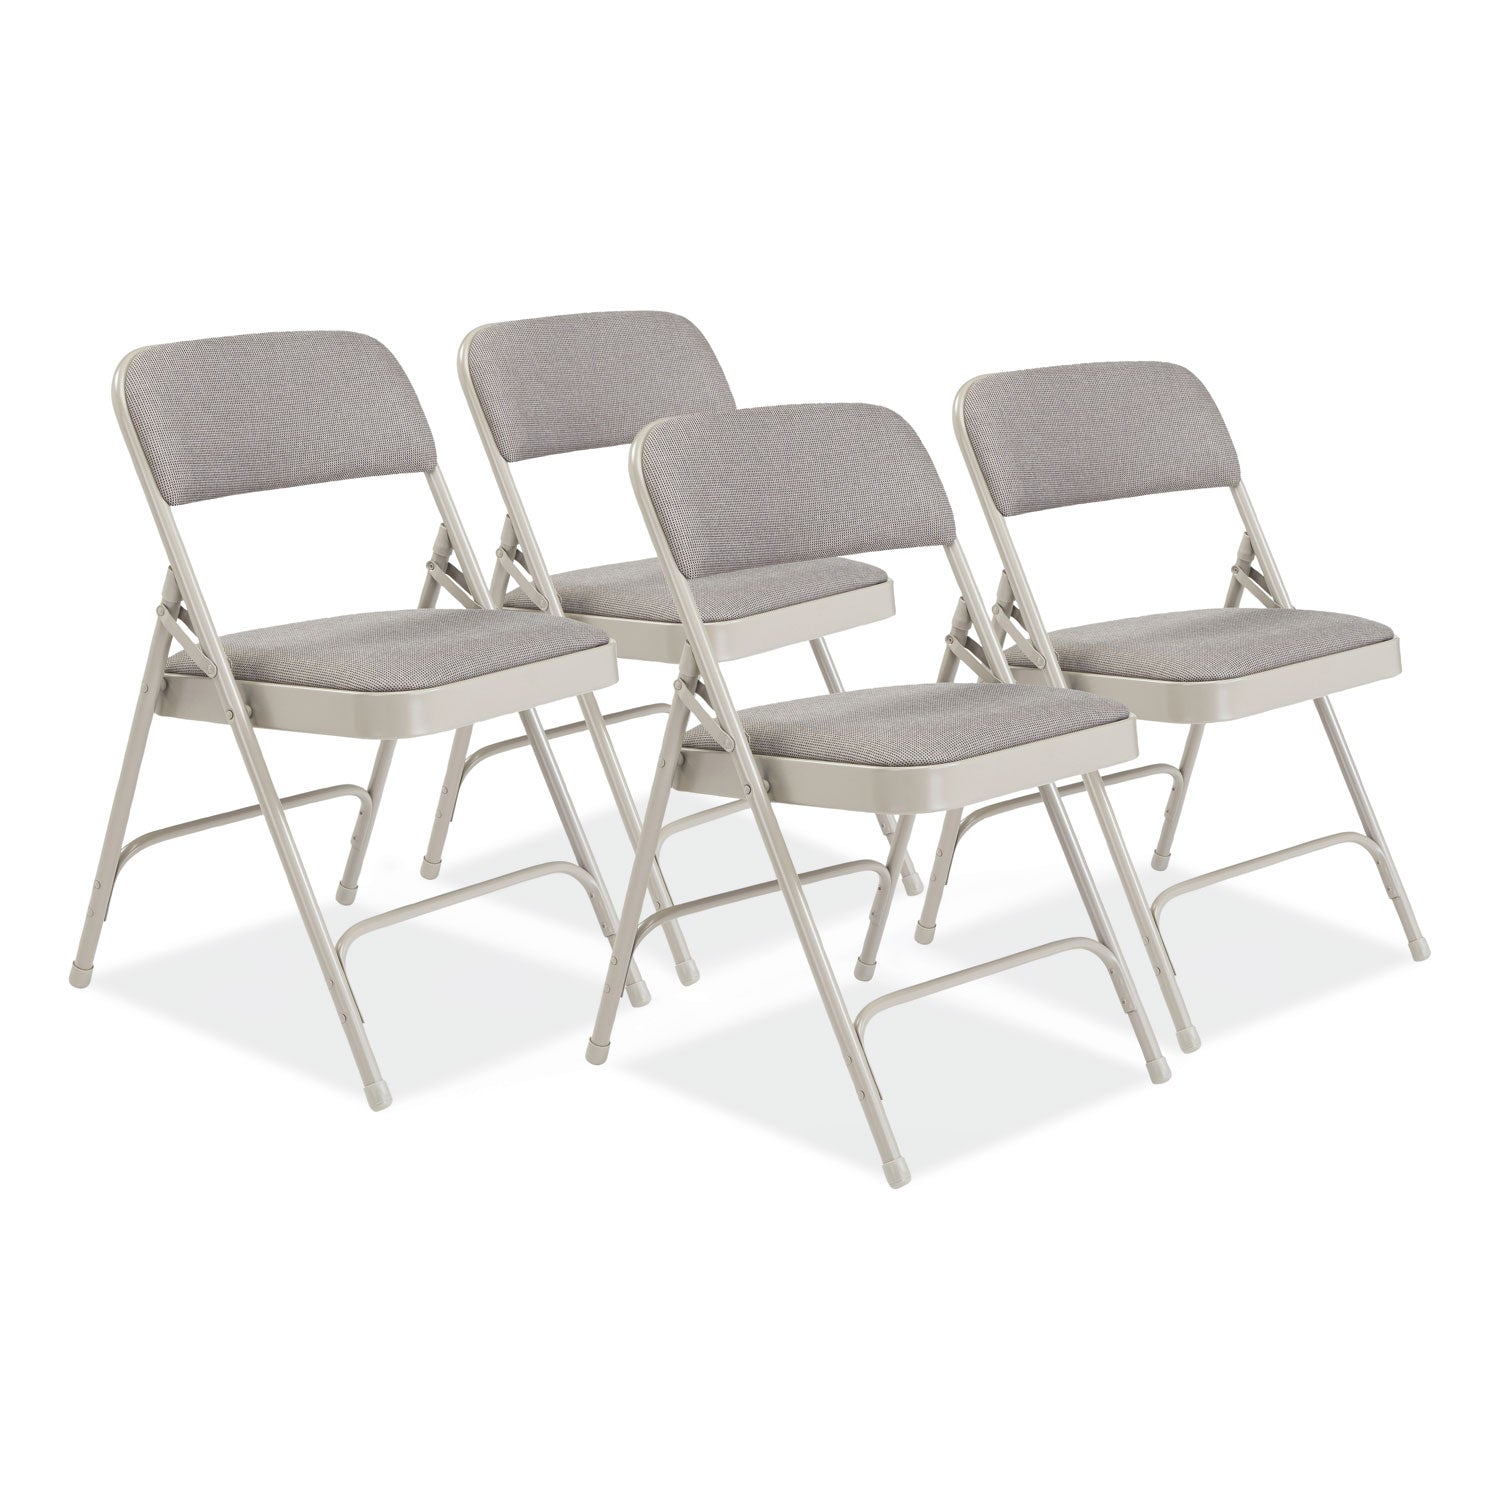 2200-series-fabric-dual-hinge-premium-folding-chair-supports-500lbgreystone-seat-backgray-base4-ct-ships-in-1-3-bus-days_nps2202 - 1